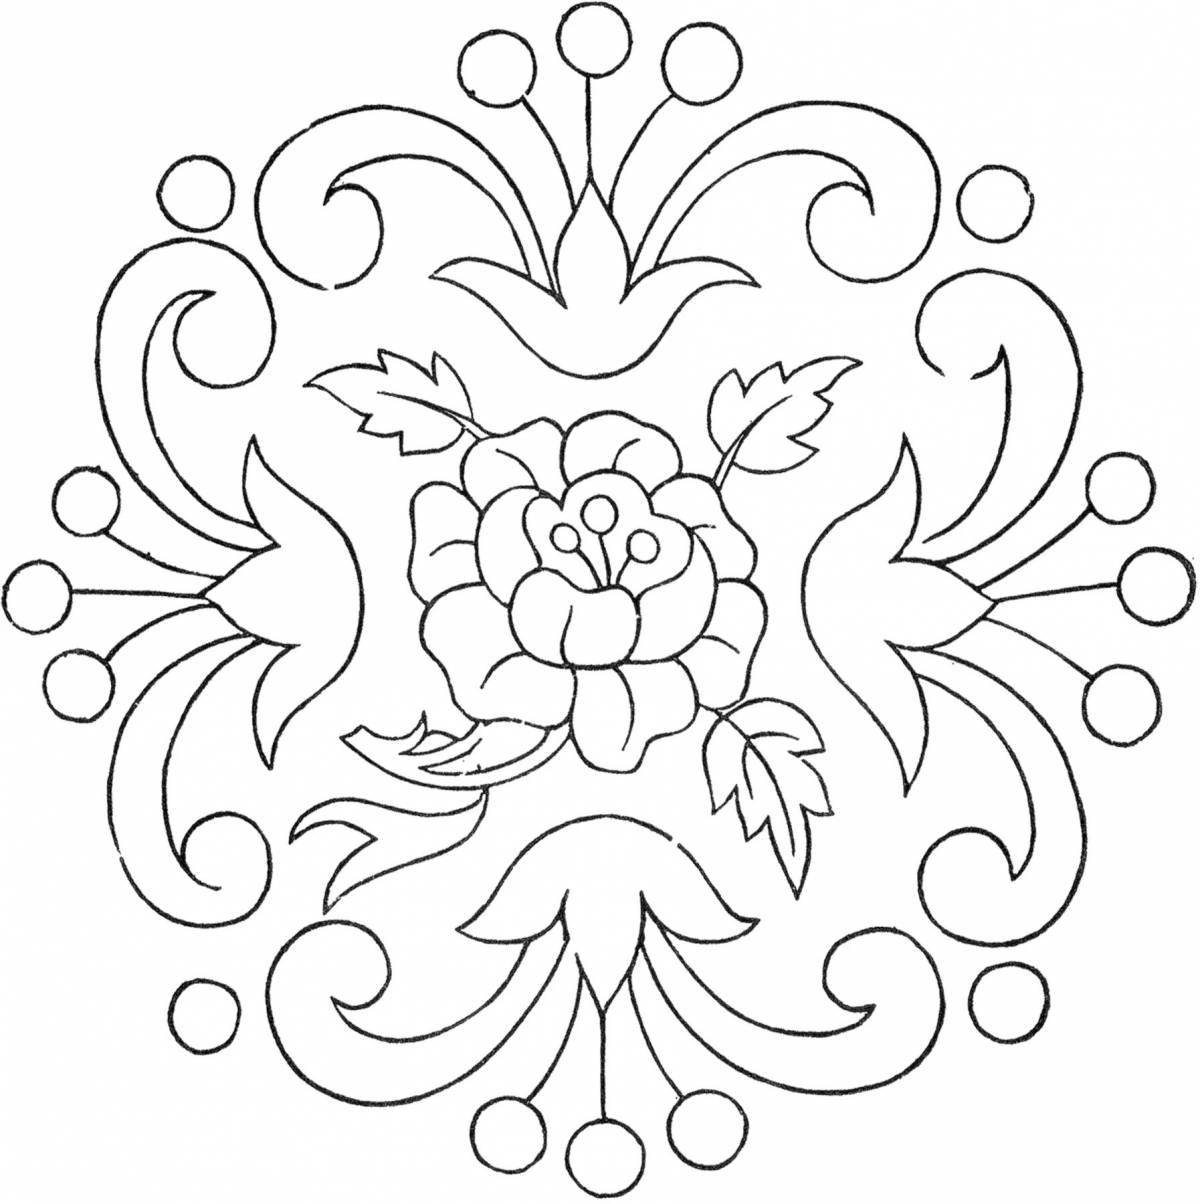 Fun coloring page tiles